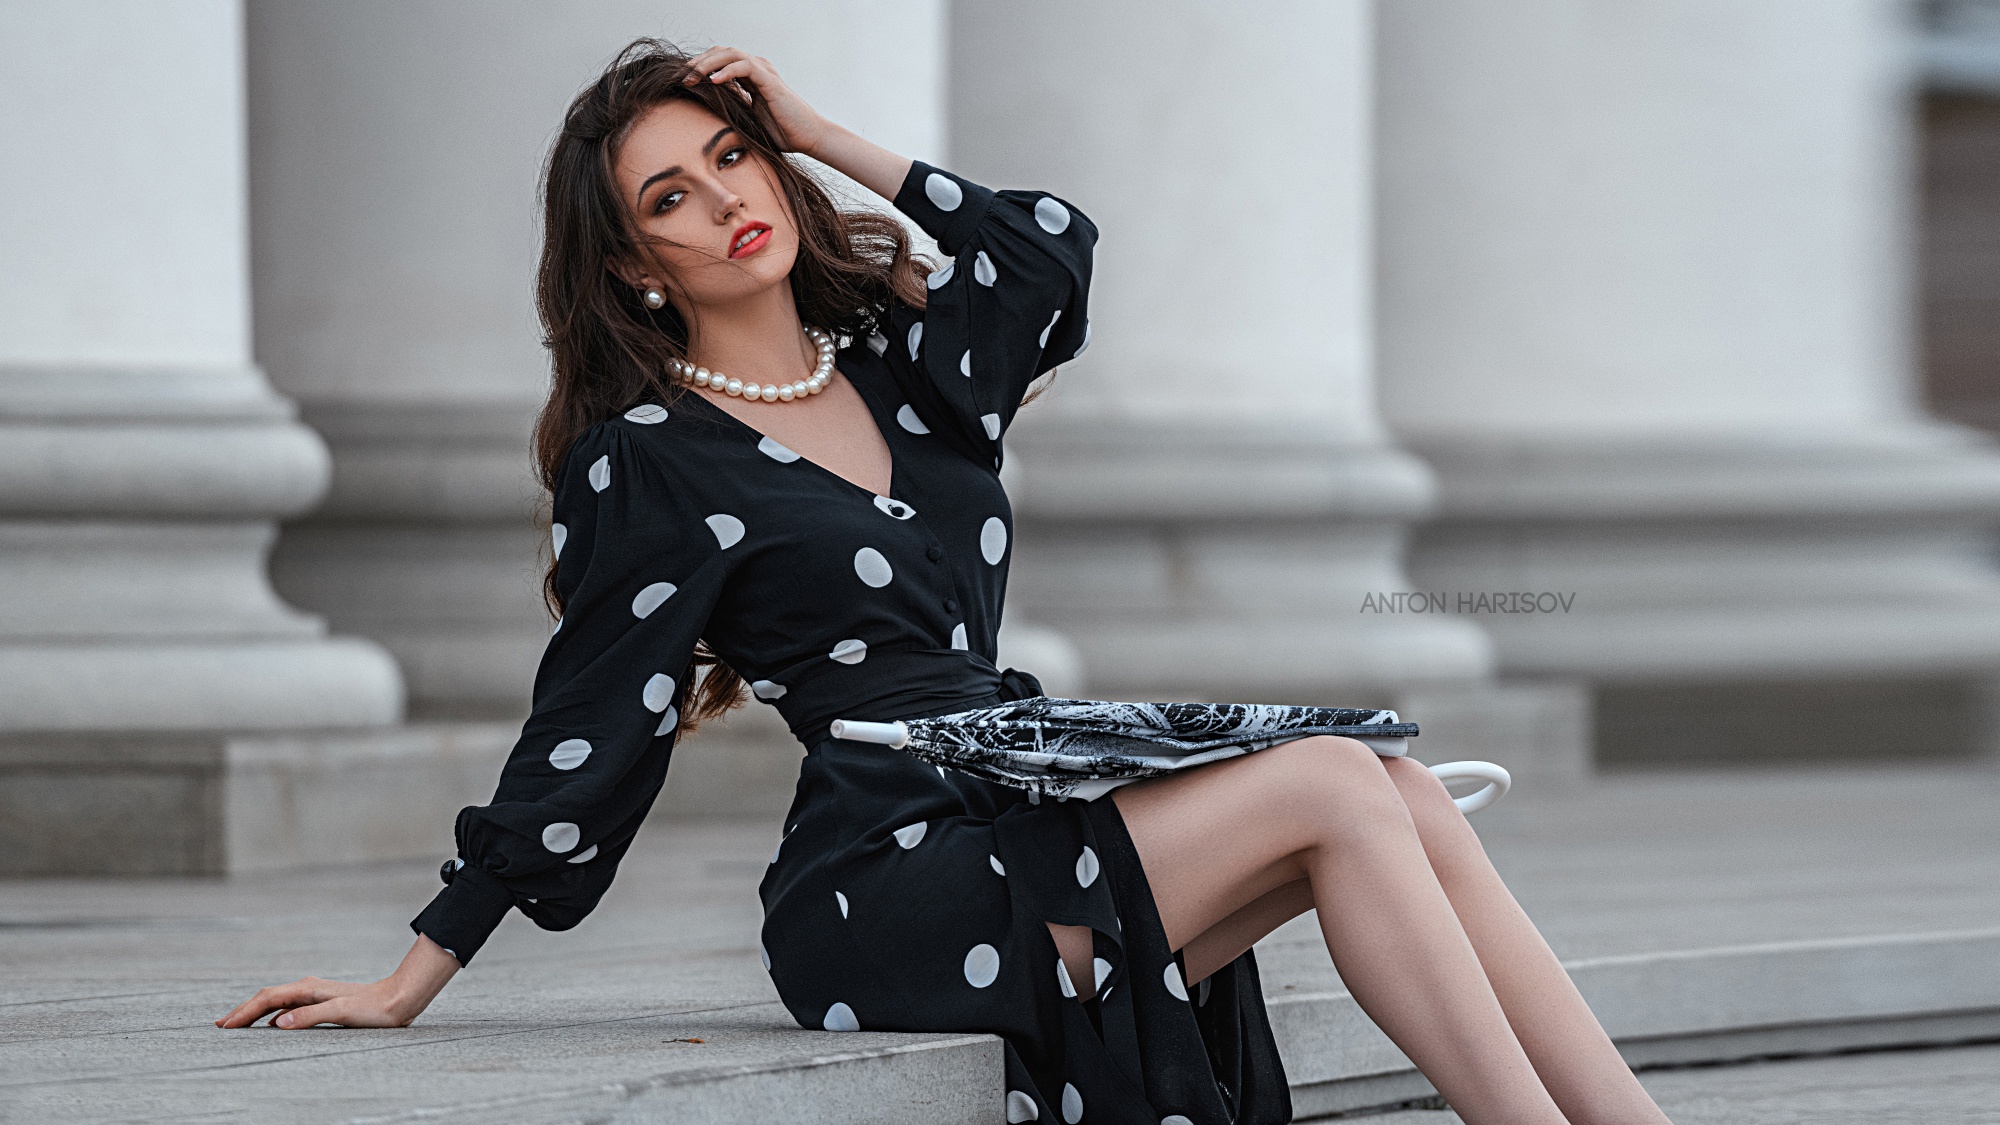 People 2000x1125 model women red lipstick sitting hand(s) in hair necklace black dress legs together Anton Harisov pearl necklace Maria Bashmakova